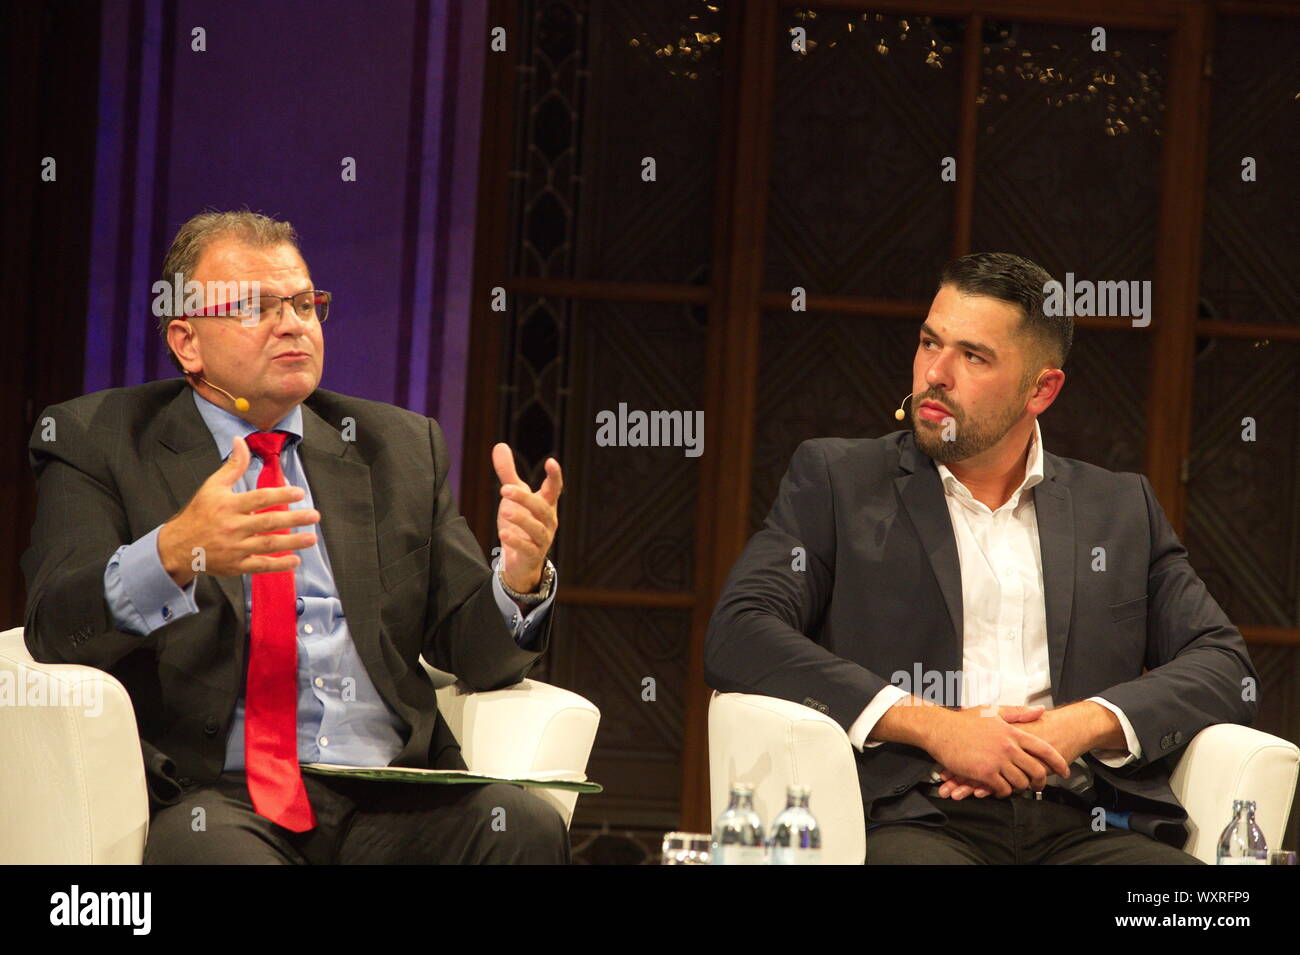 Vienna, Austria. 17th September 2019. Panel Discussion of the Vienna Freedom Academy on Political Islam. 'Political Islam as a challenge for internal security' with (L) Hans-Jörg Jenewein FPOE (Austrian Freedom Party) and  ex-jihadist, author and advisor (R)   Irfan Peci at the Palais Ferstel in Vienna on 17 September 2019. Credit: Franz Perc/Alamy Live News Stock Photo